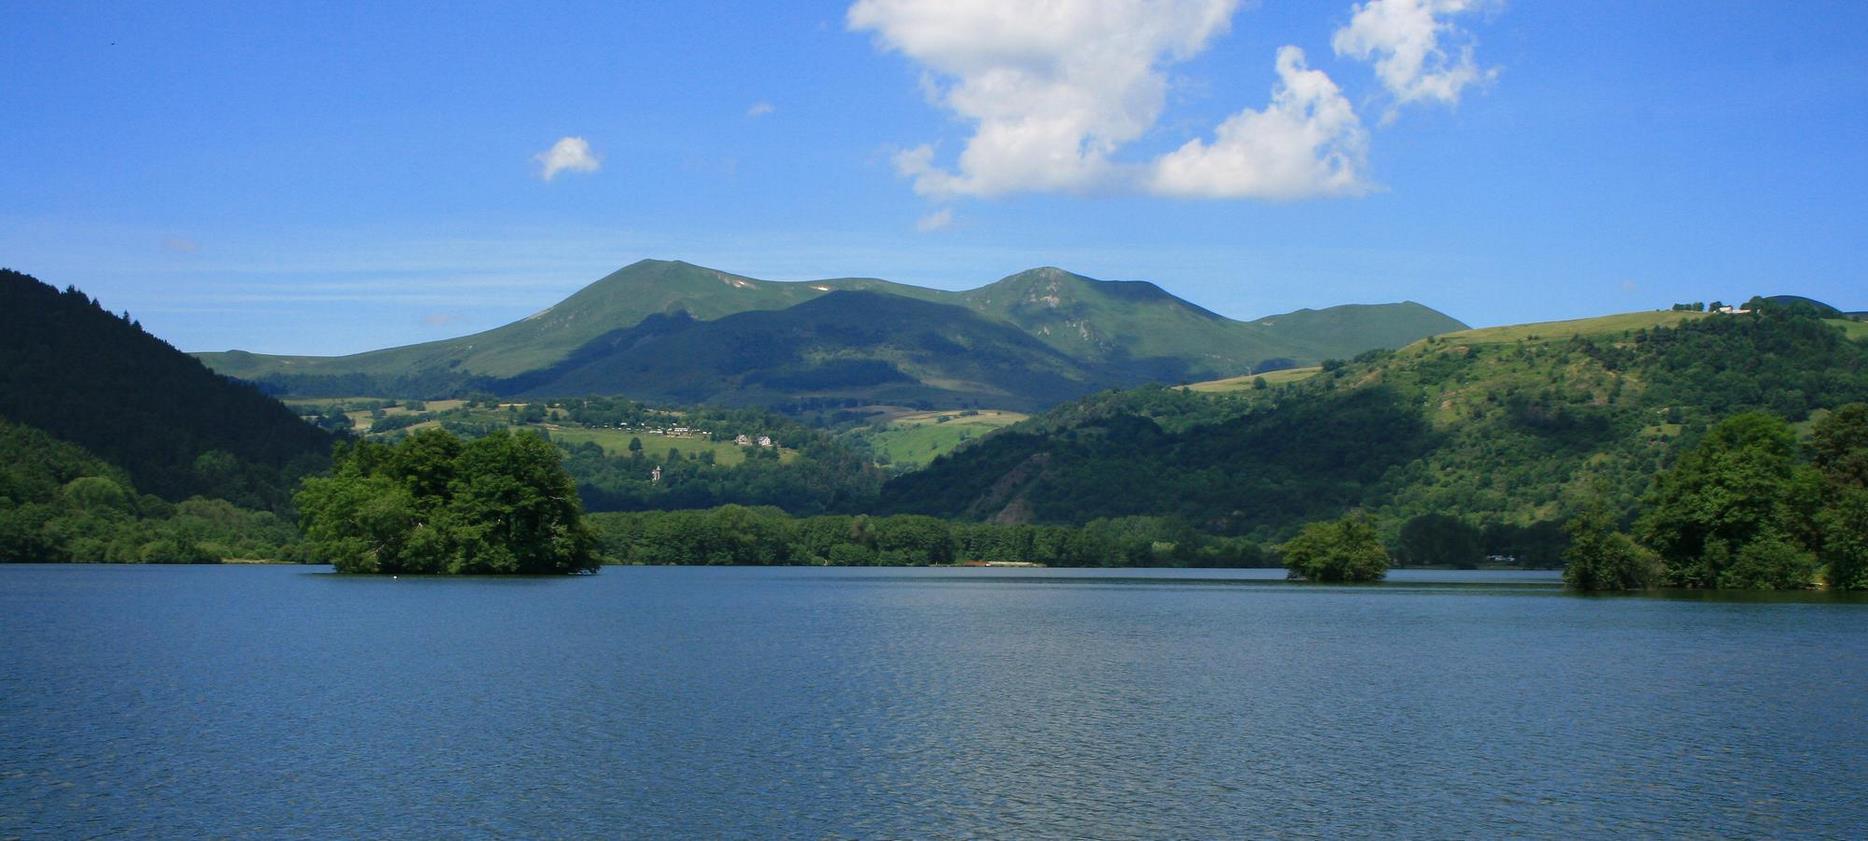 Super Besse - panorama of the Sancy massif seen from Lac Chambon